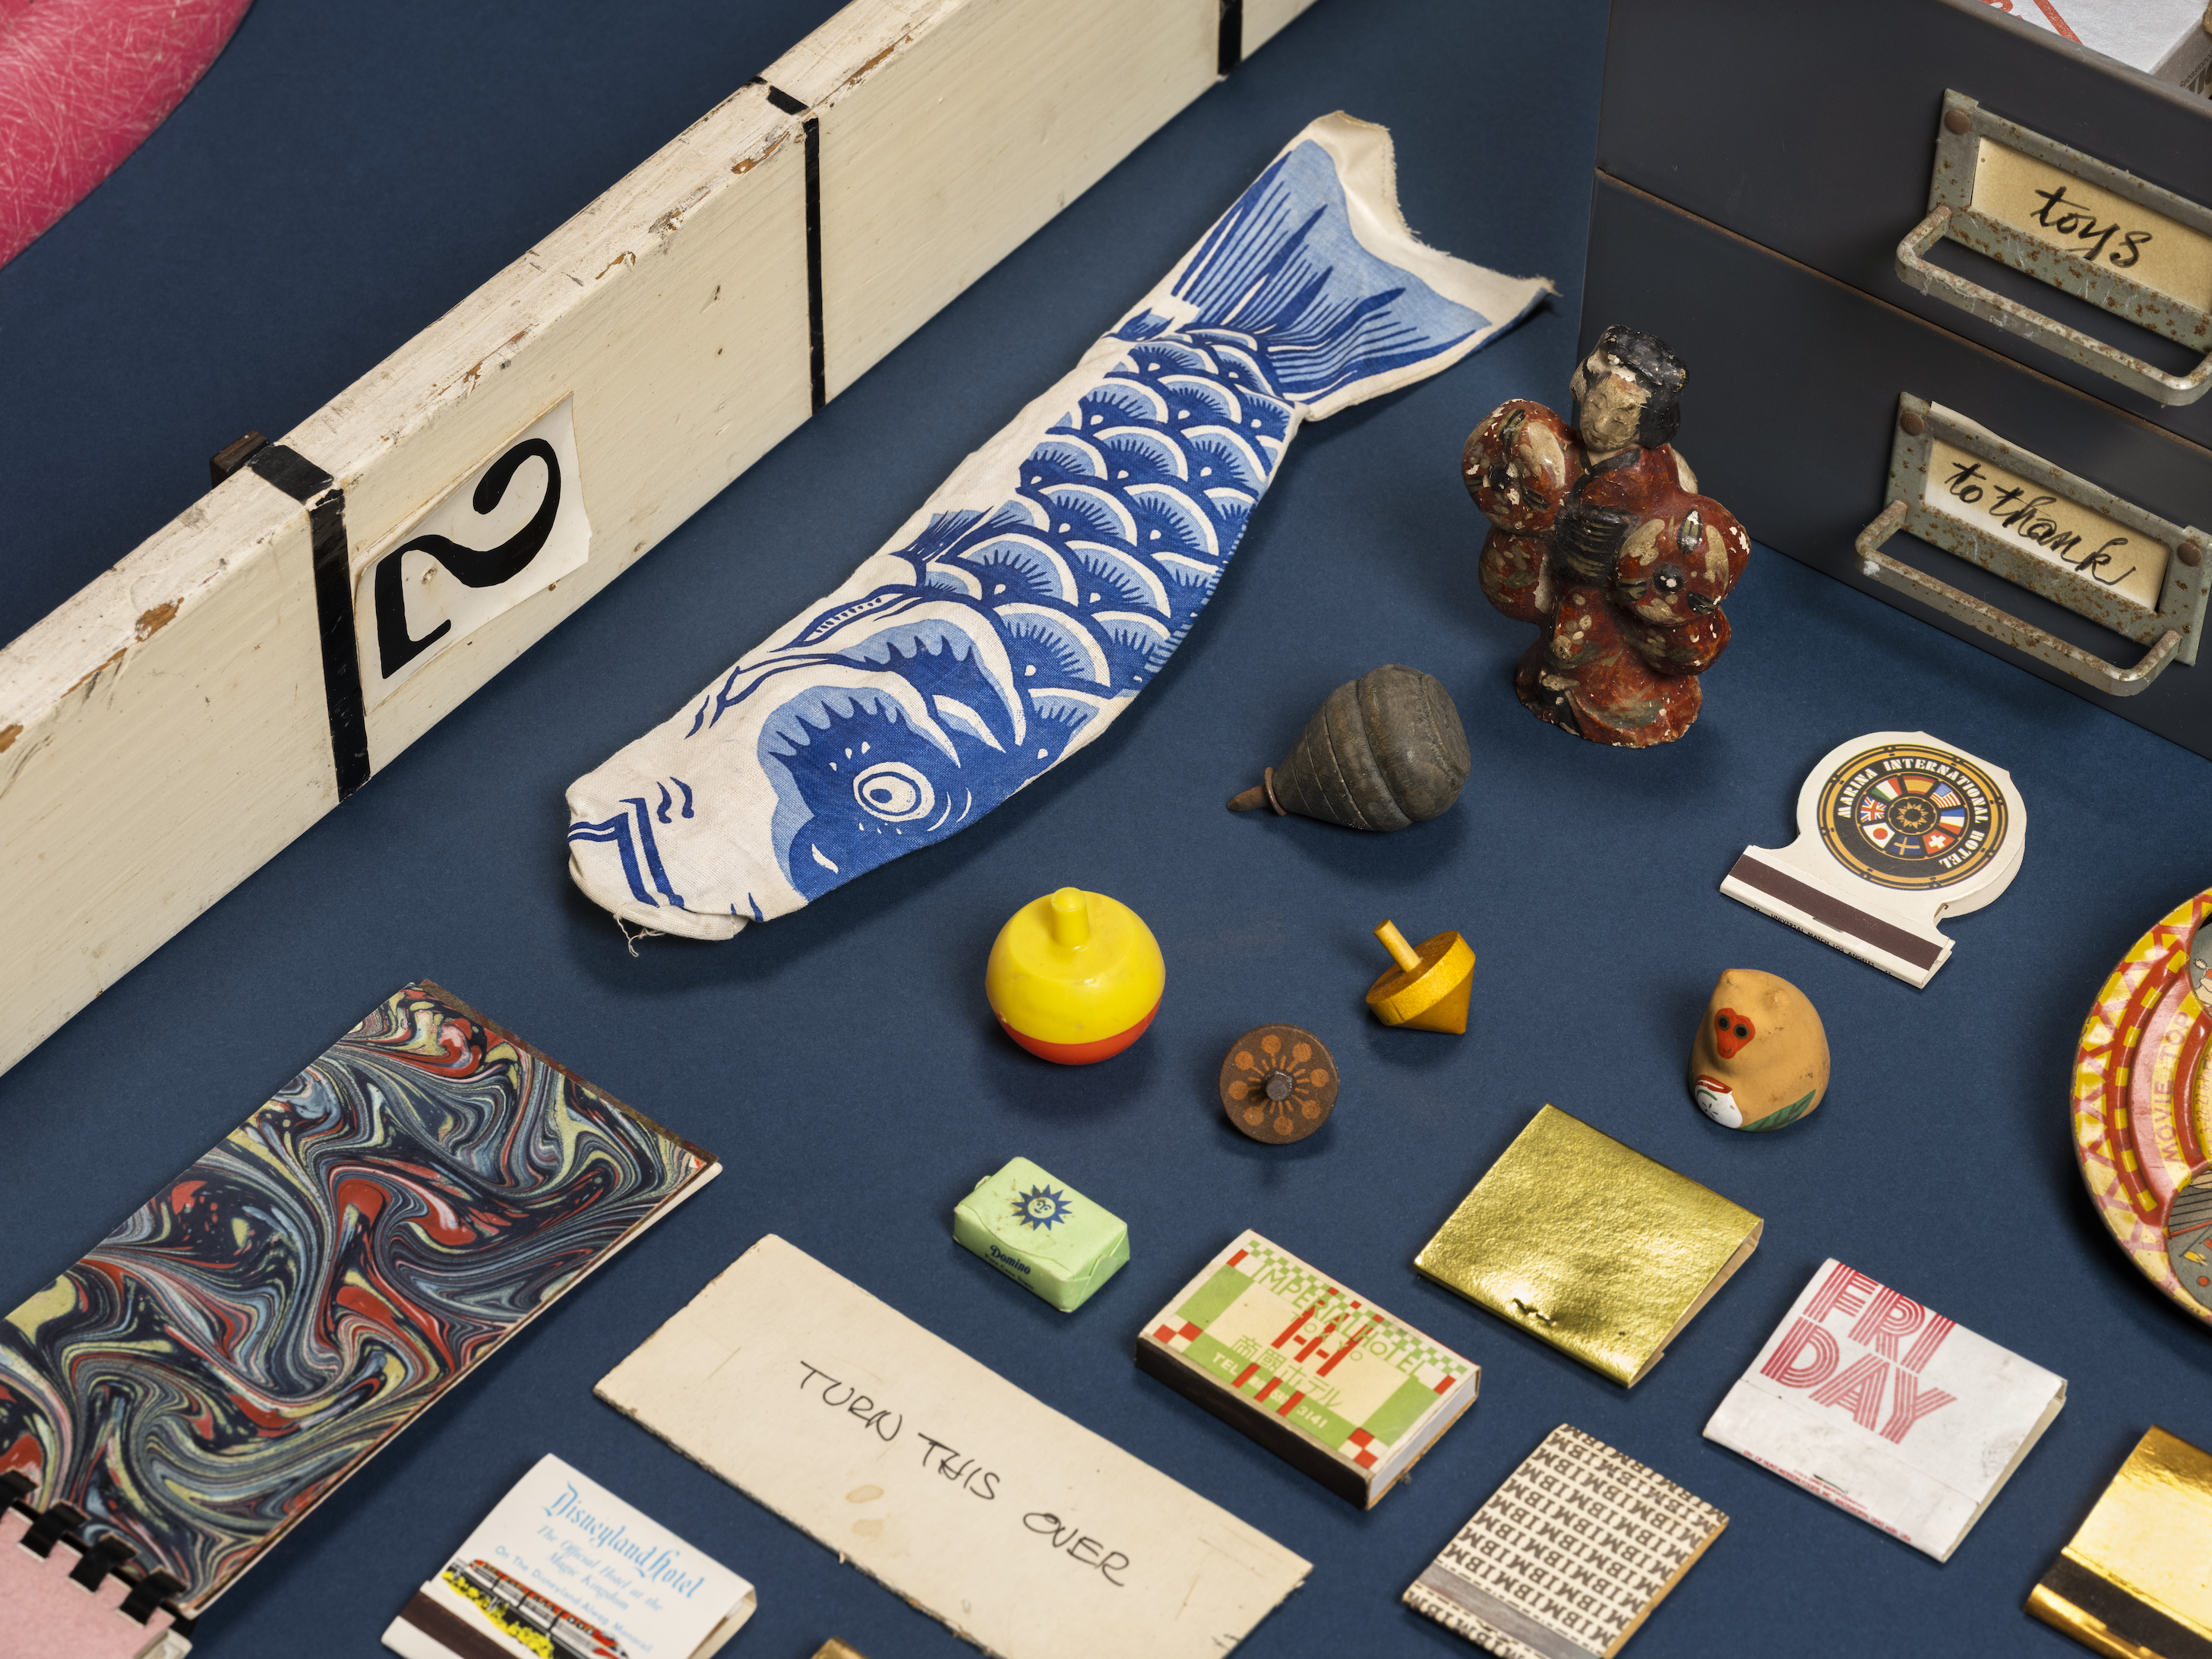 Collectibles of the Eameses’. Photos: Eames Institute